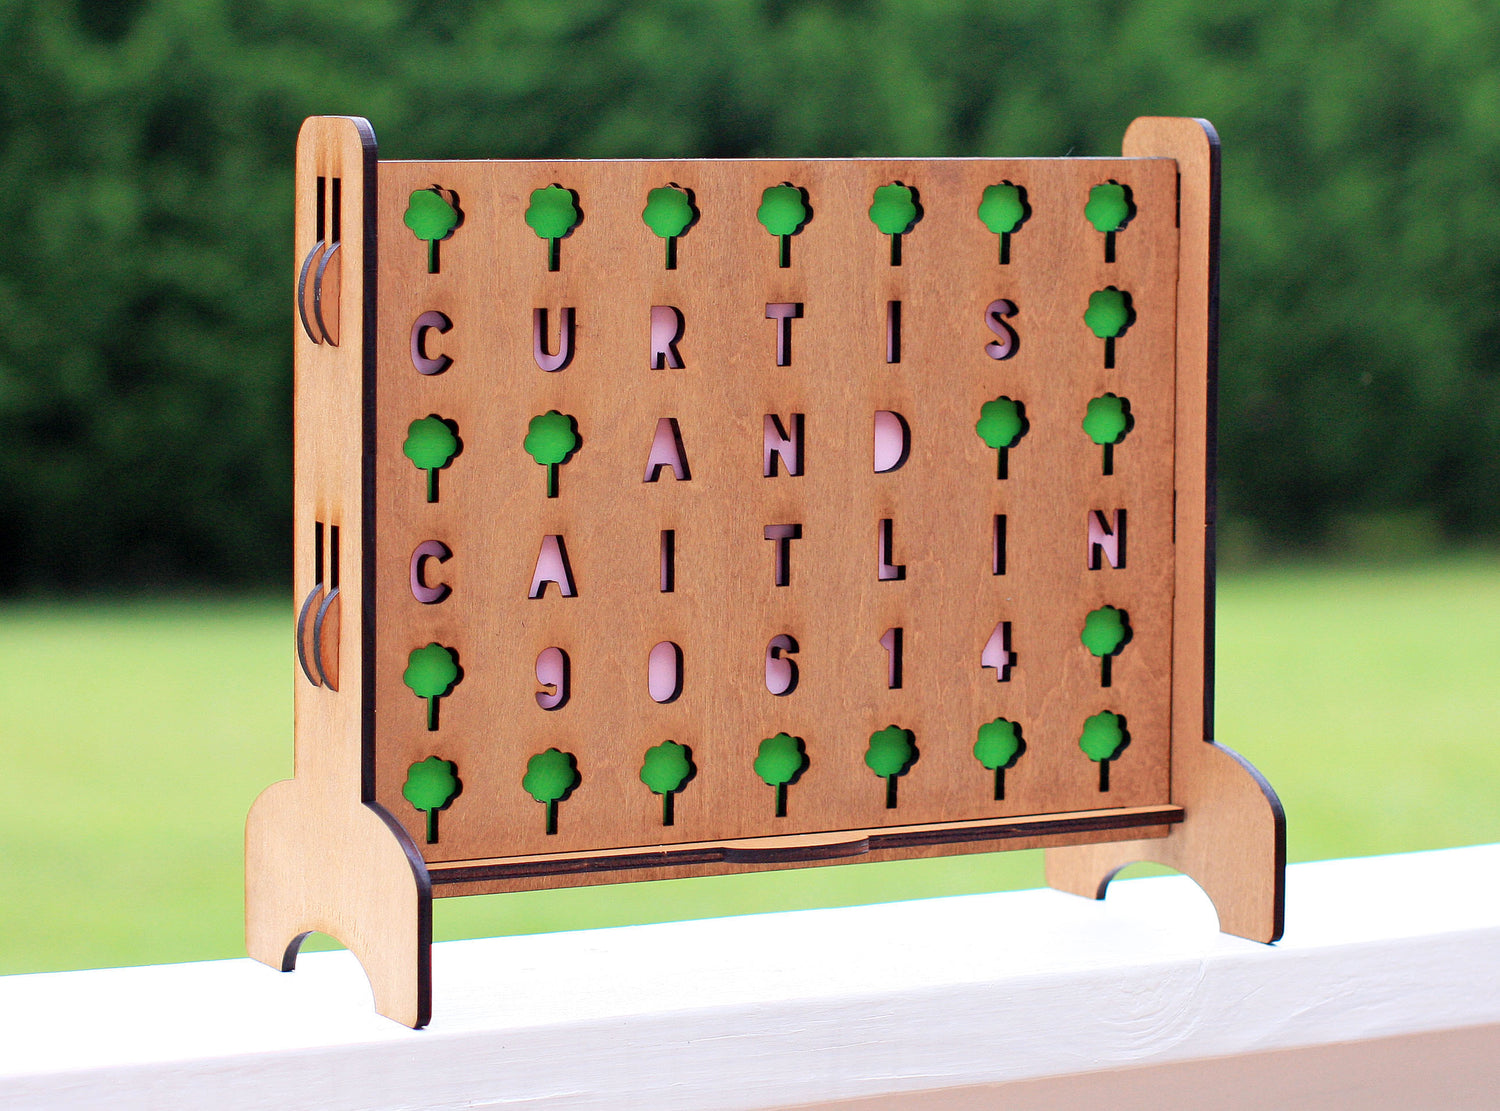 All Tabletop Connect 4 Games